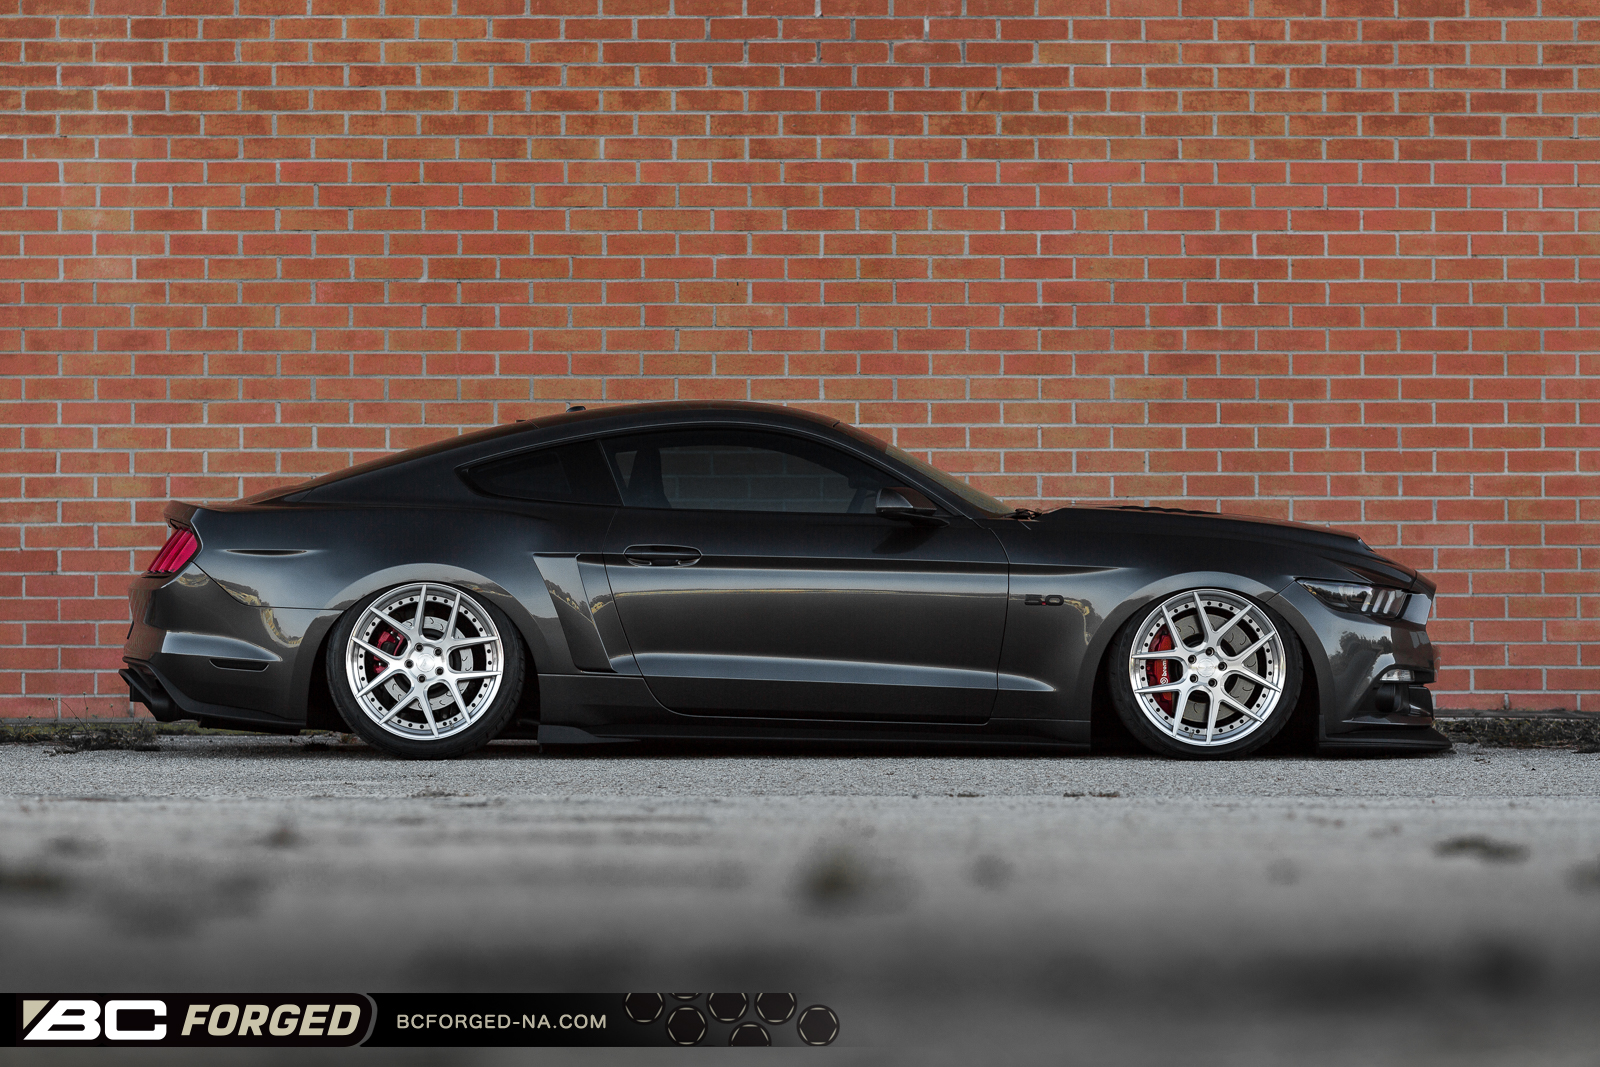 BC-FORGED-HC02S-BRUSHED-SILVER-CONCAVE-WHEELS-MAGNETIC-FORD-MUSTANG-GTPP-S550.jpg